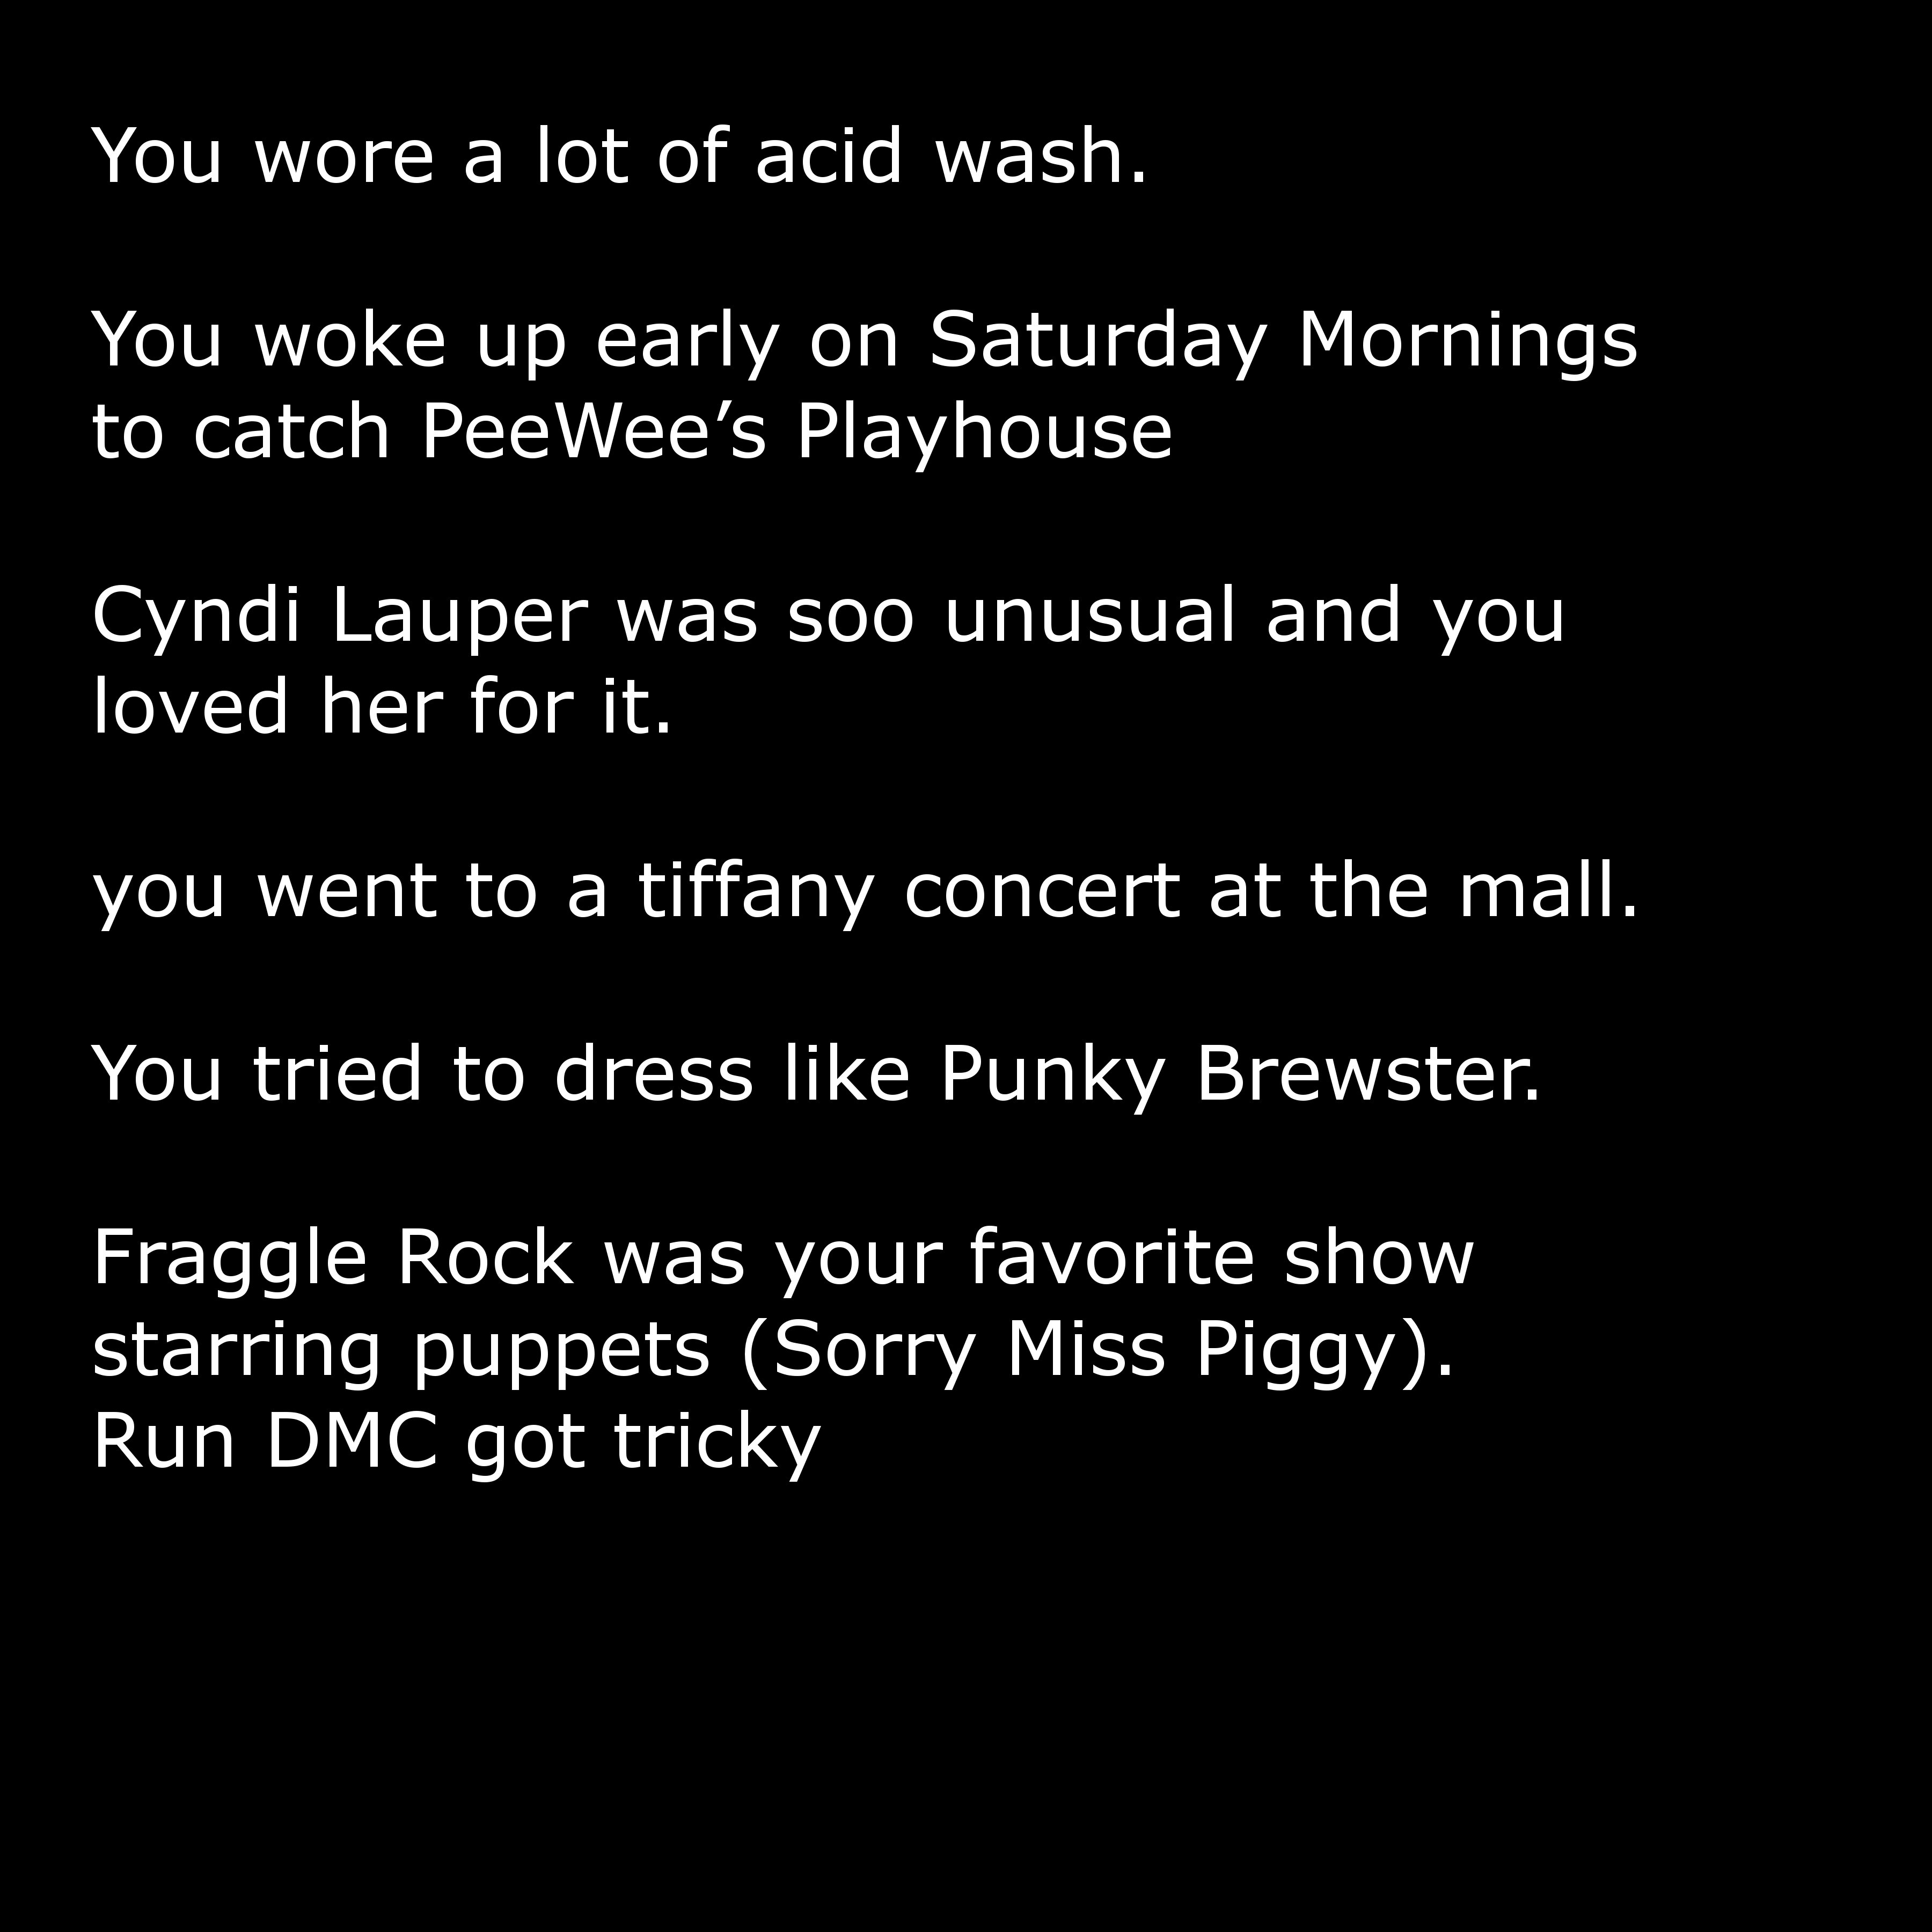 angle - You wore a lot of acid wash. You woke up early on Saturday Mornings to catch PeeWee's Playhouse Cyndi Lauper was soo unusual and you loved her for it. you went to a tiffany concert at the mall. You tried to dress Punky Brewster. Fraggle Rock was y